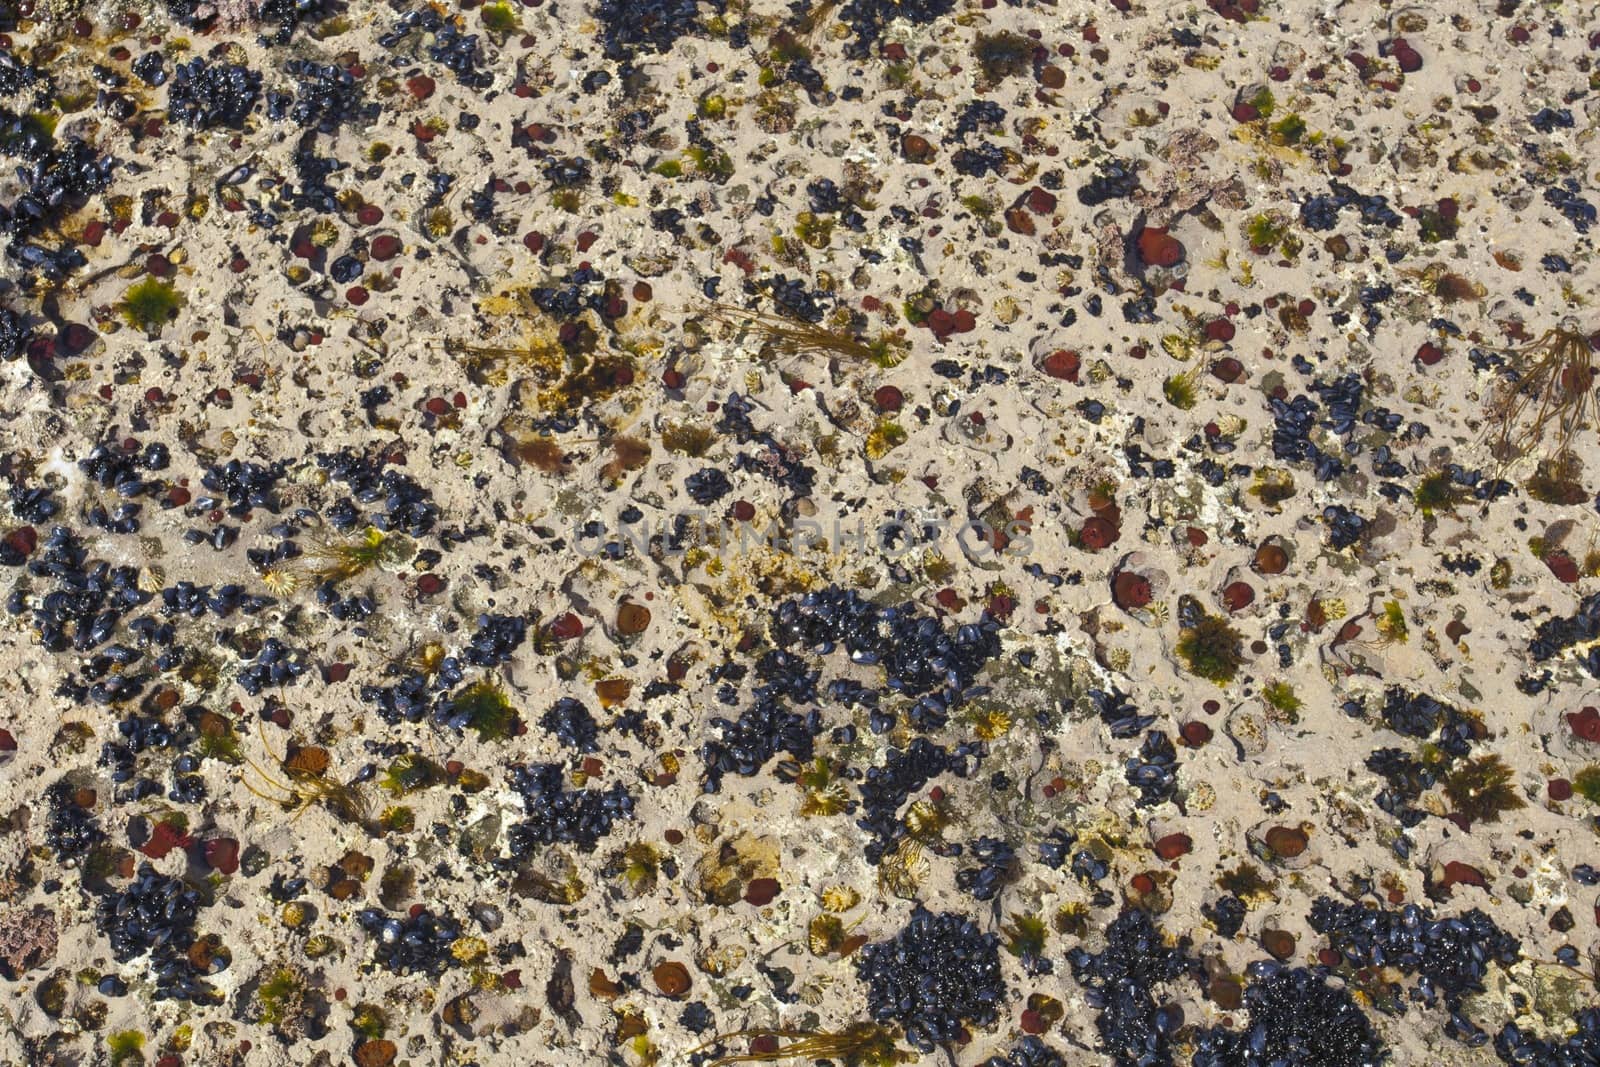 Close up of a rock pool containing various marine life like Beadlet anemone (Actinia equina), the common limpet (Patella vulgata) and Blue mussels (Mytilus edulis)